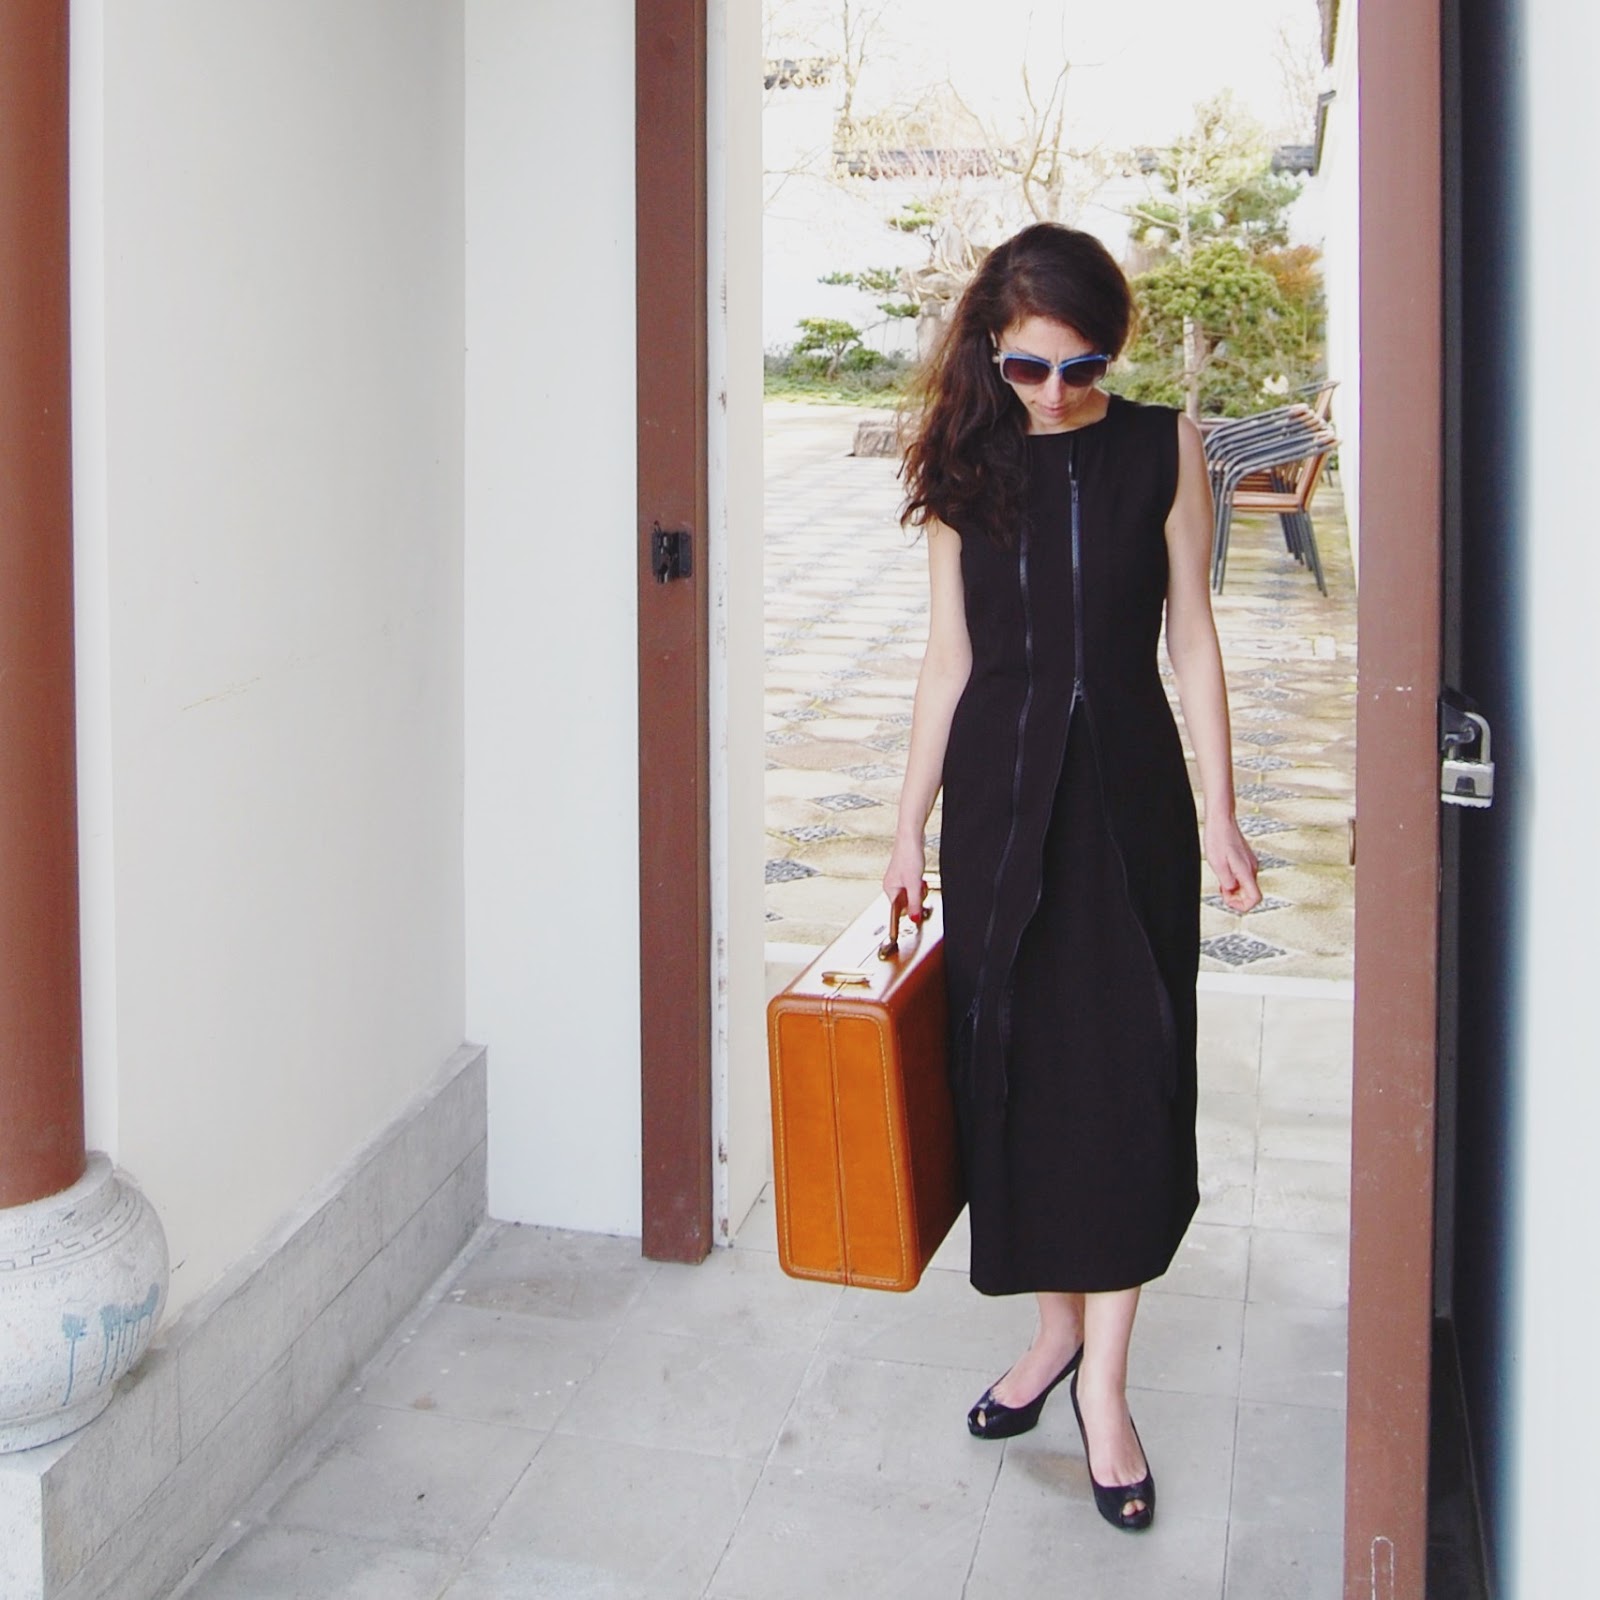 The Zipper Dress by Poppyseed: Engineered to Change with You